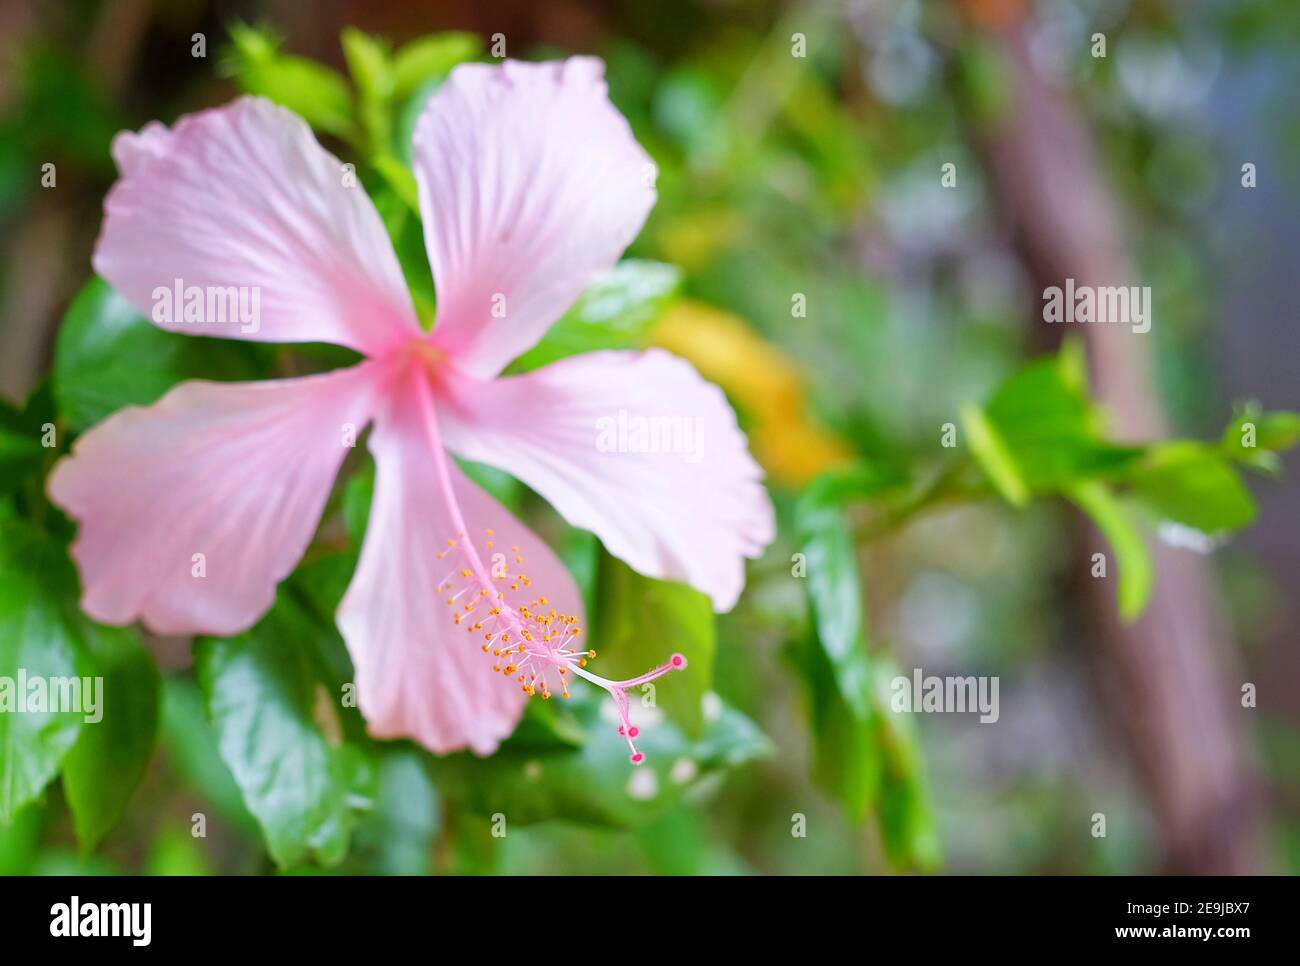 A close up picture of a blooming pink hibiscus flower. Stock Photo